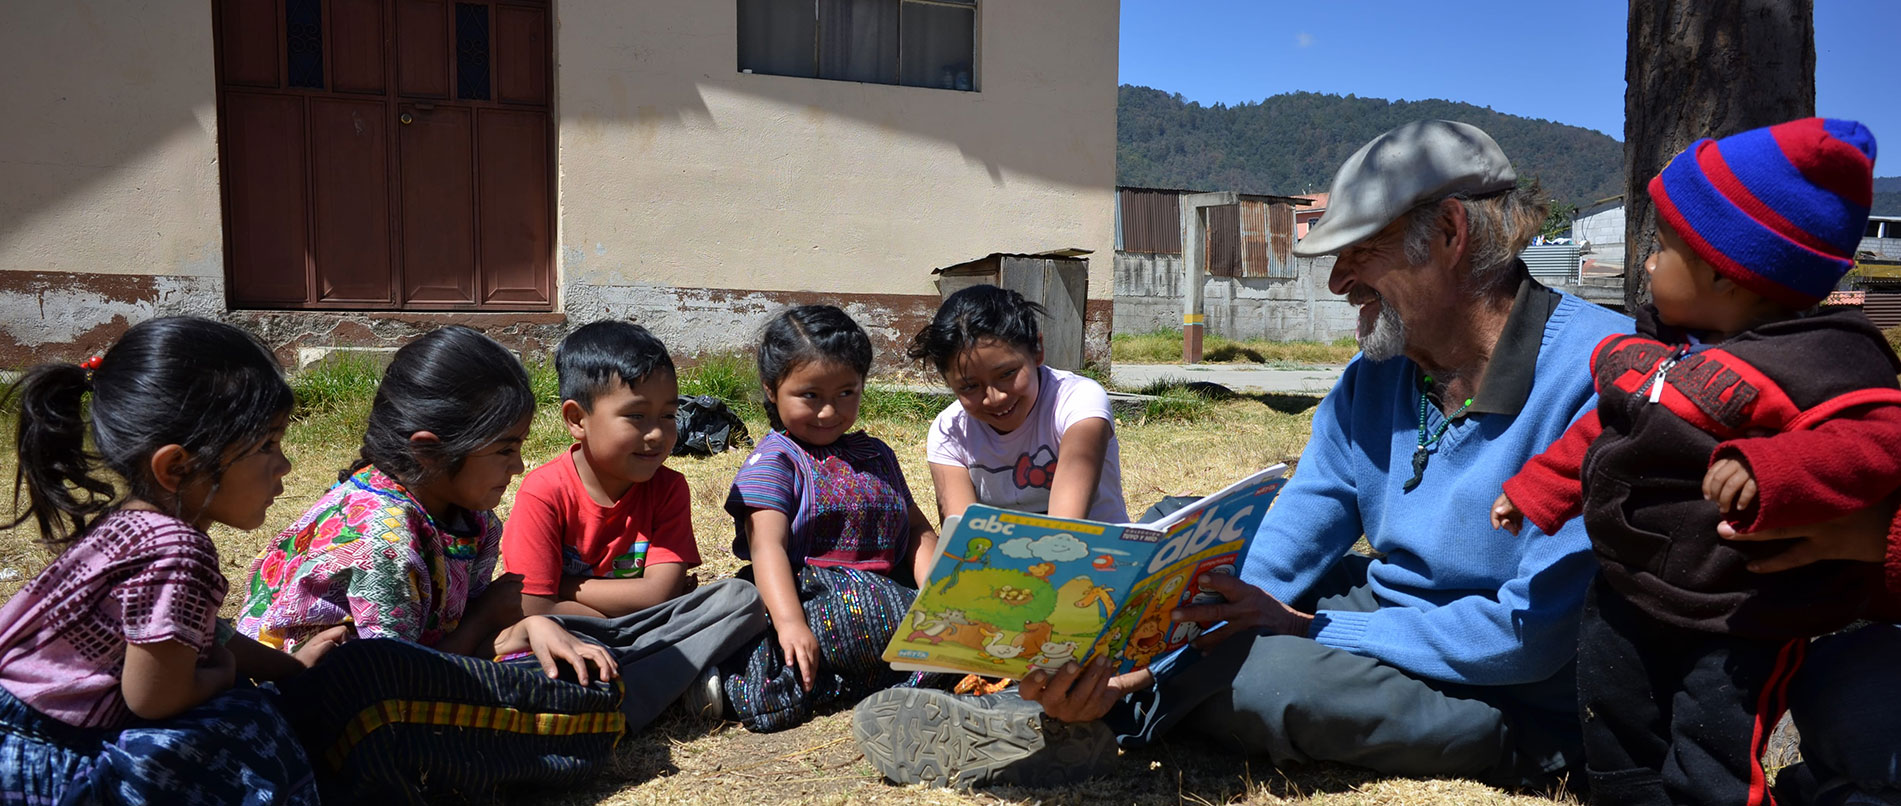 Teaching-and-Education-Volunteer-in-Guatemala-cover